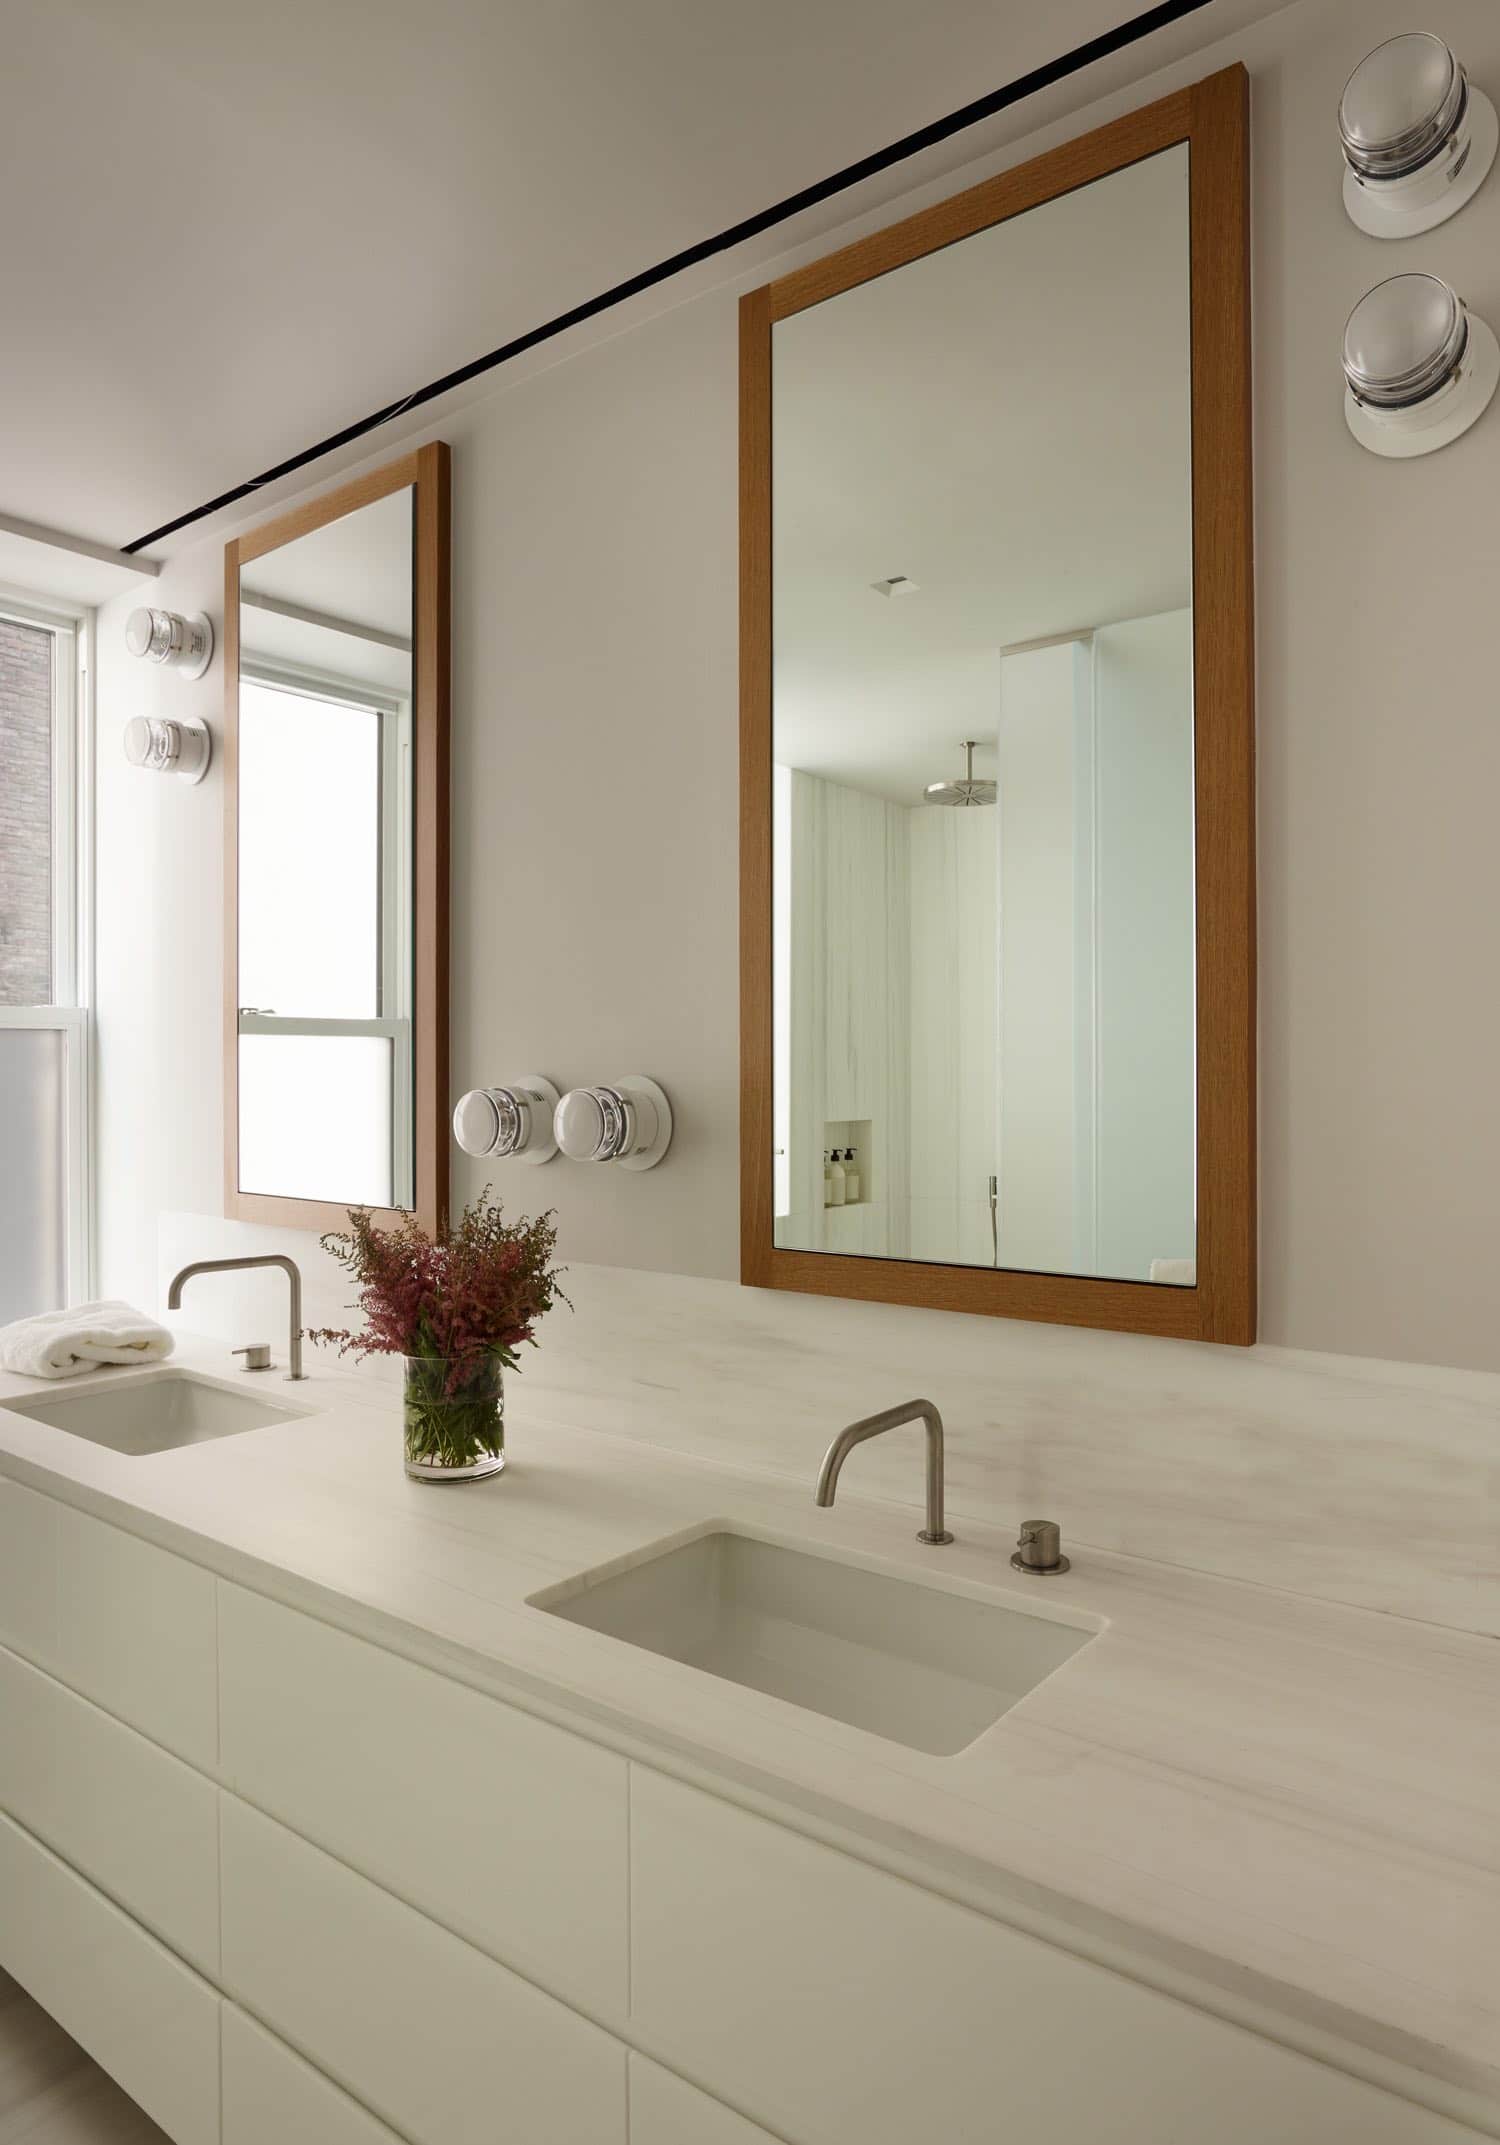 This image shows a double vanity in a Master Bathroom designed by Carol Egan with Fresnel wall lights by Joe Colombo above the sinks and in wall medicine cabinets.  The white marble countertop sits above lacquered white drawer cabinets below.  The faucets are from Vola and are shown in a stainless-Steel finish.